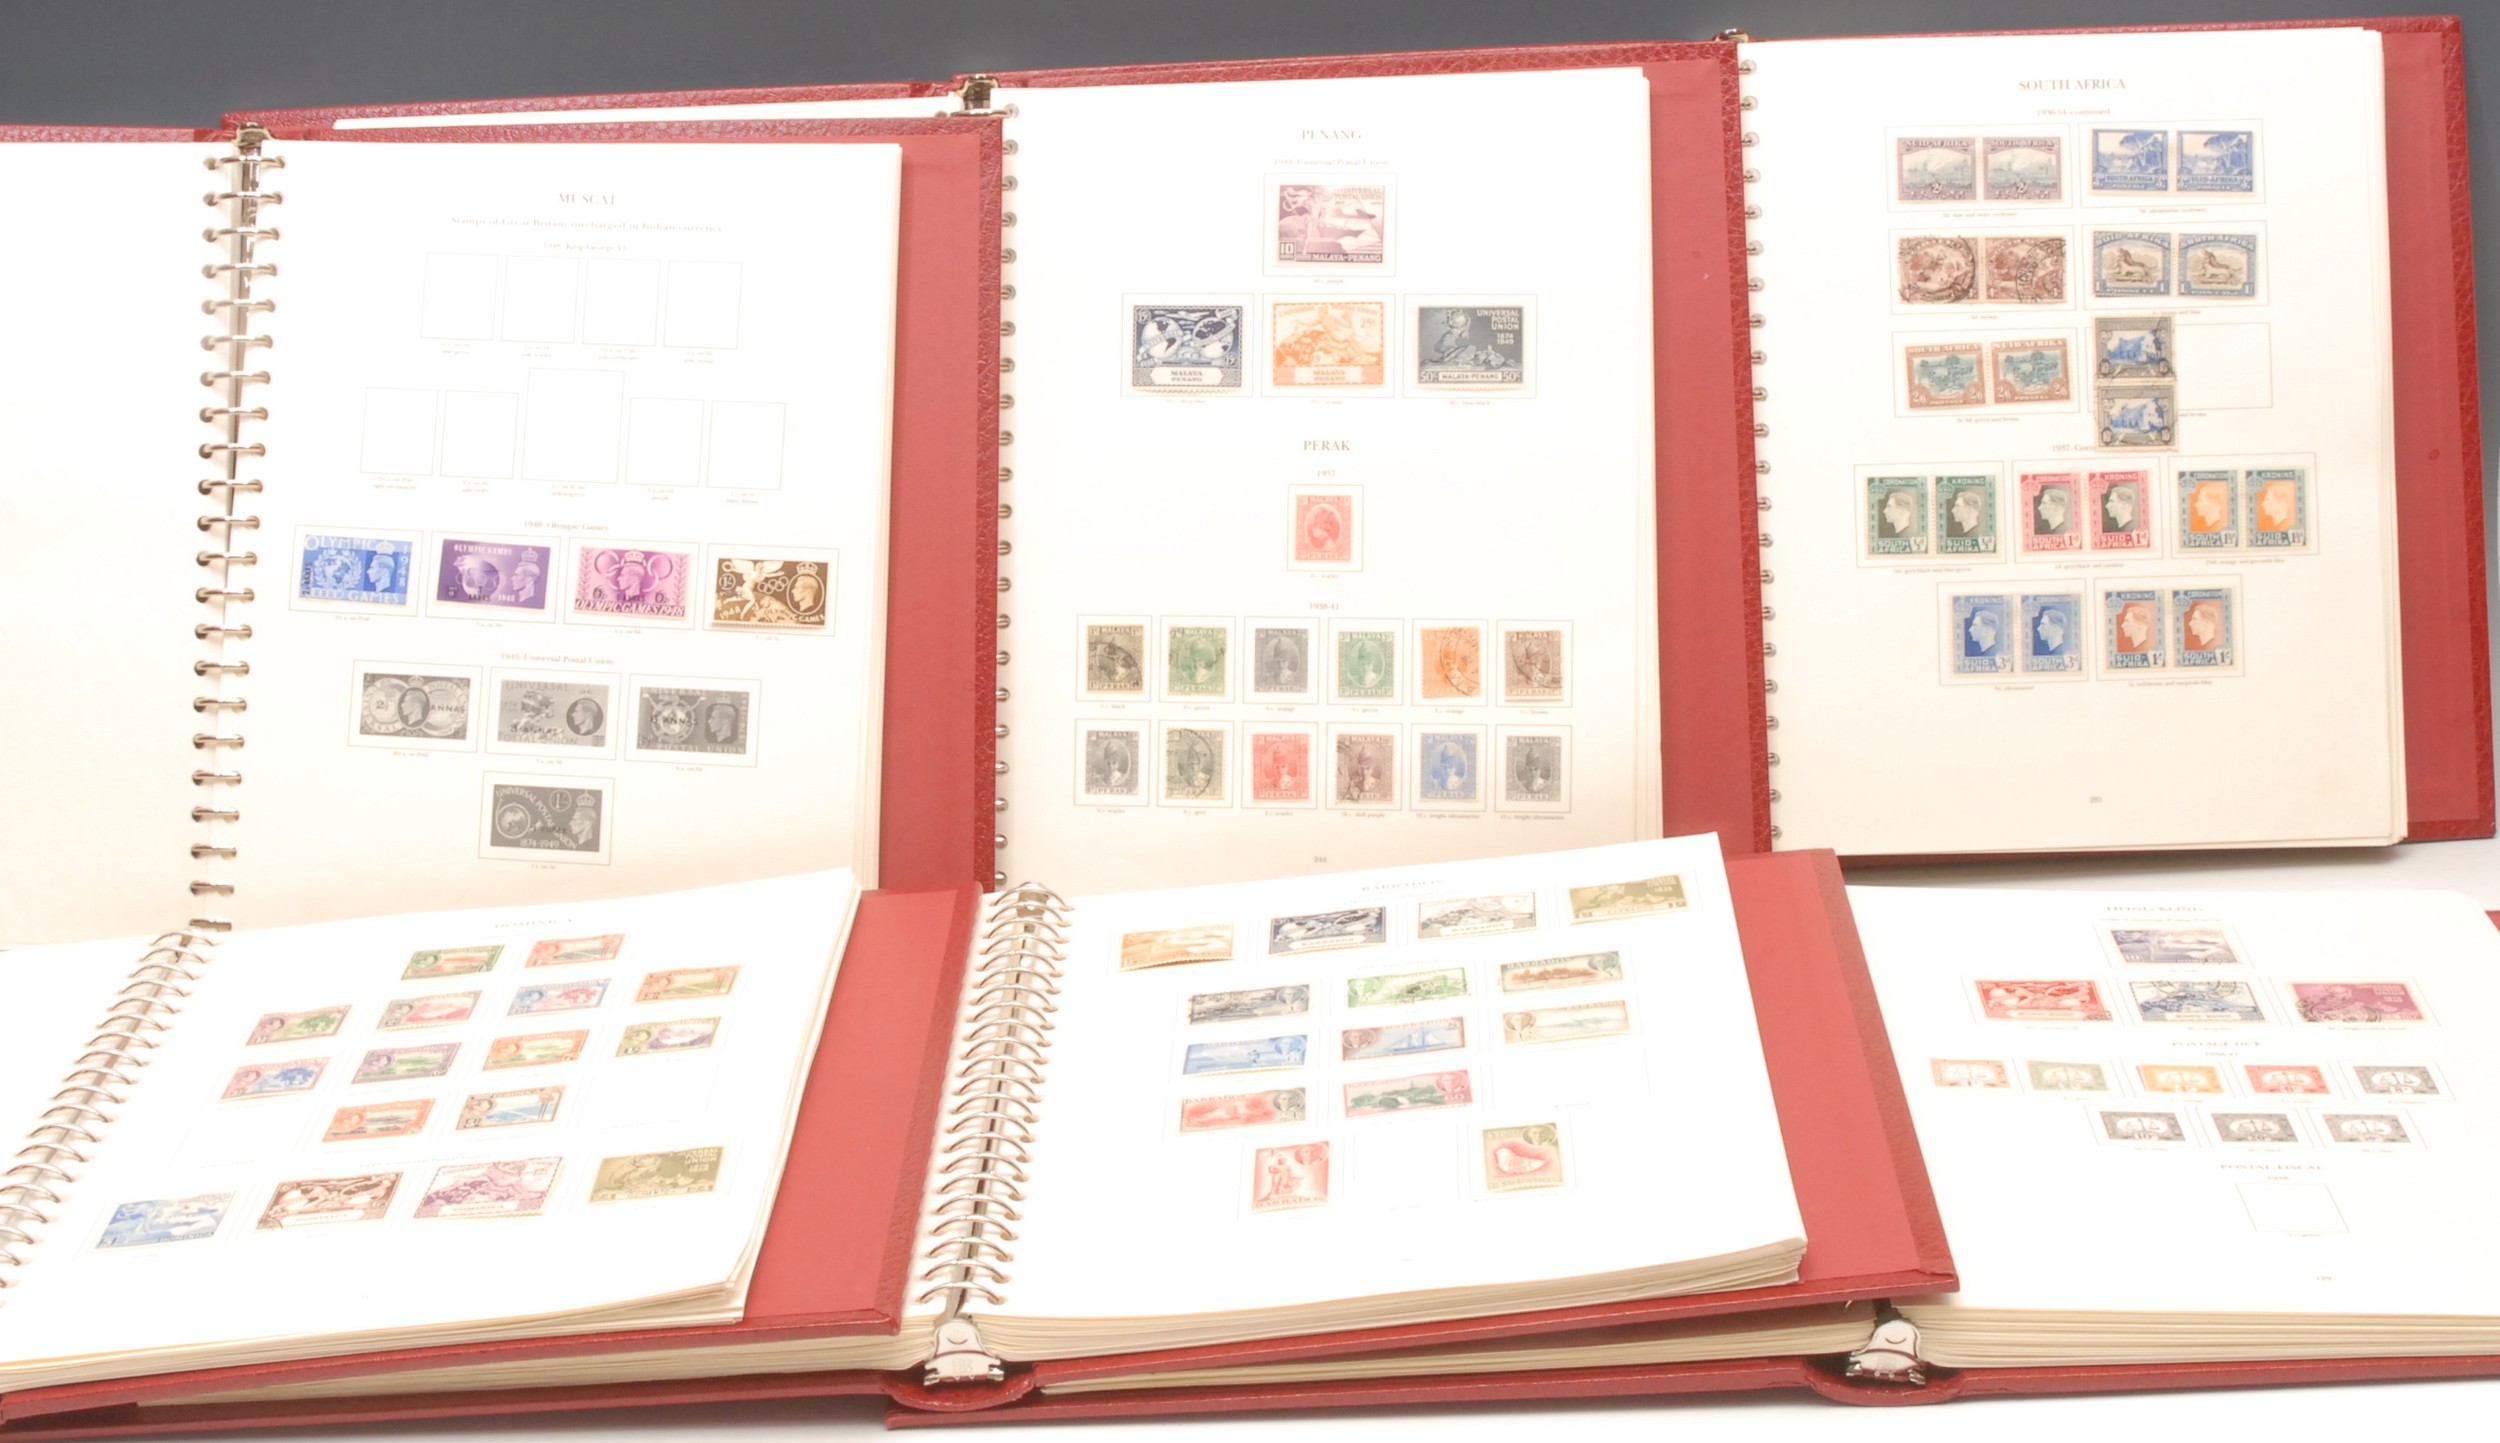 Stamps - GVI Stanley Gibbons British Commonwealth issues 1936 - 1952 housed in six red binders - Image 3 of 4